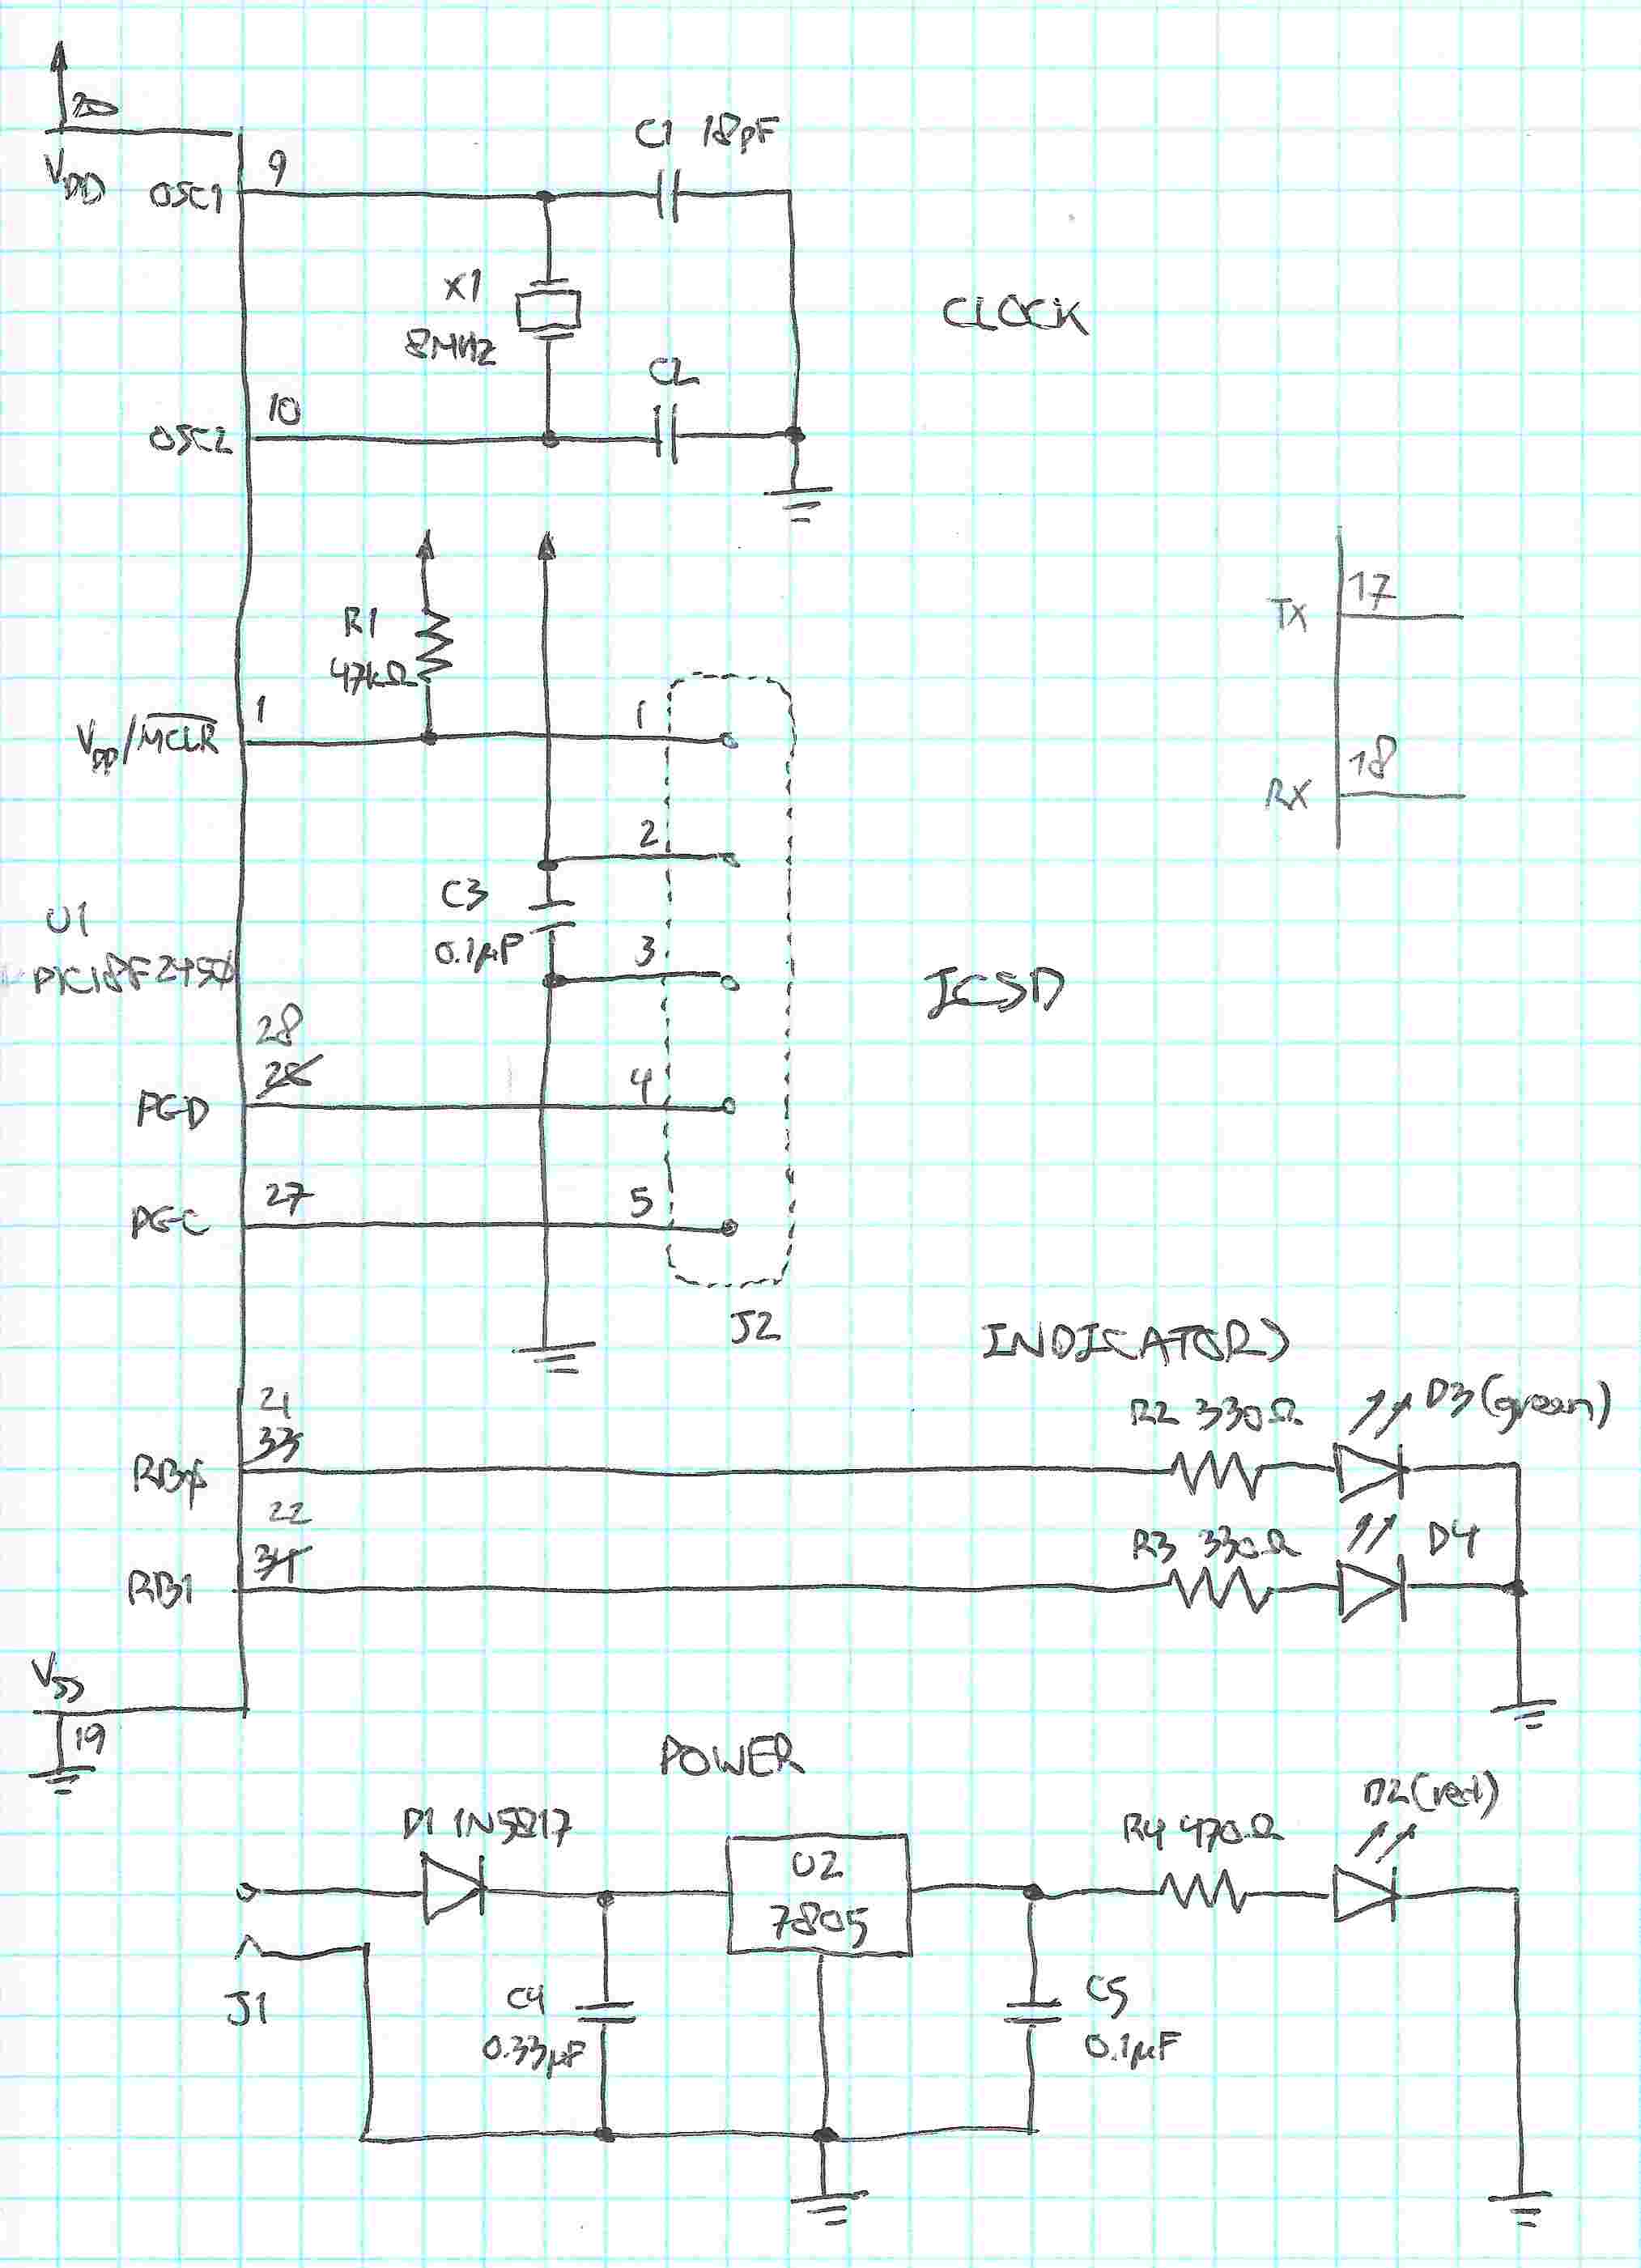 Breadboard-based prototype electrical schematic